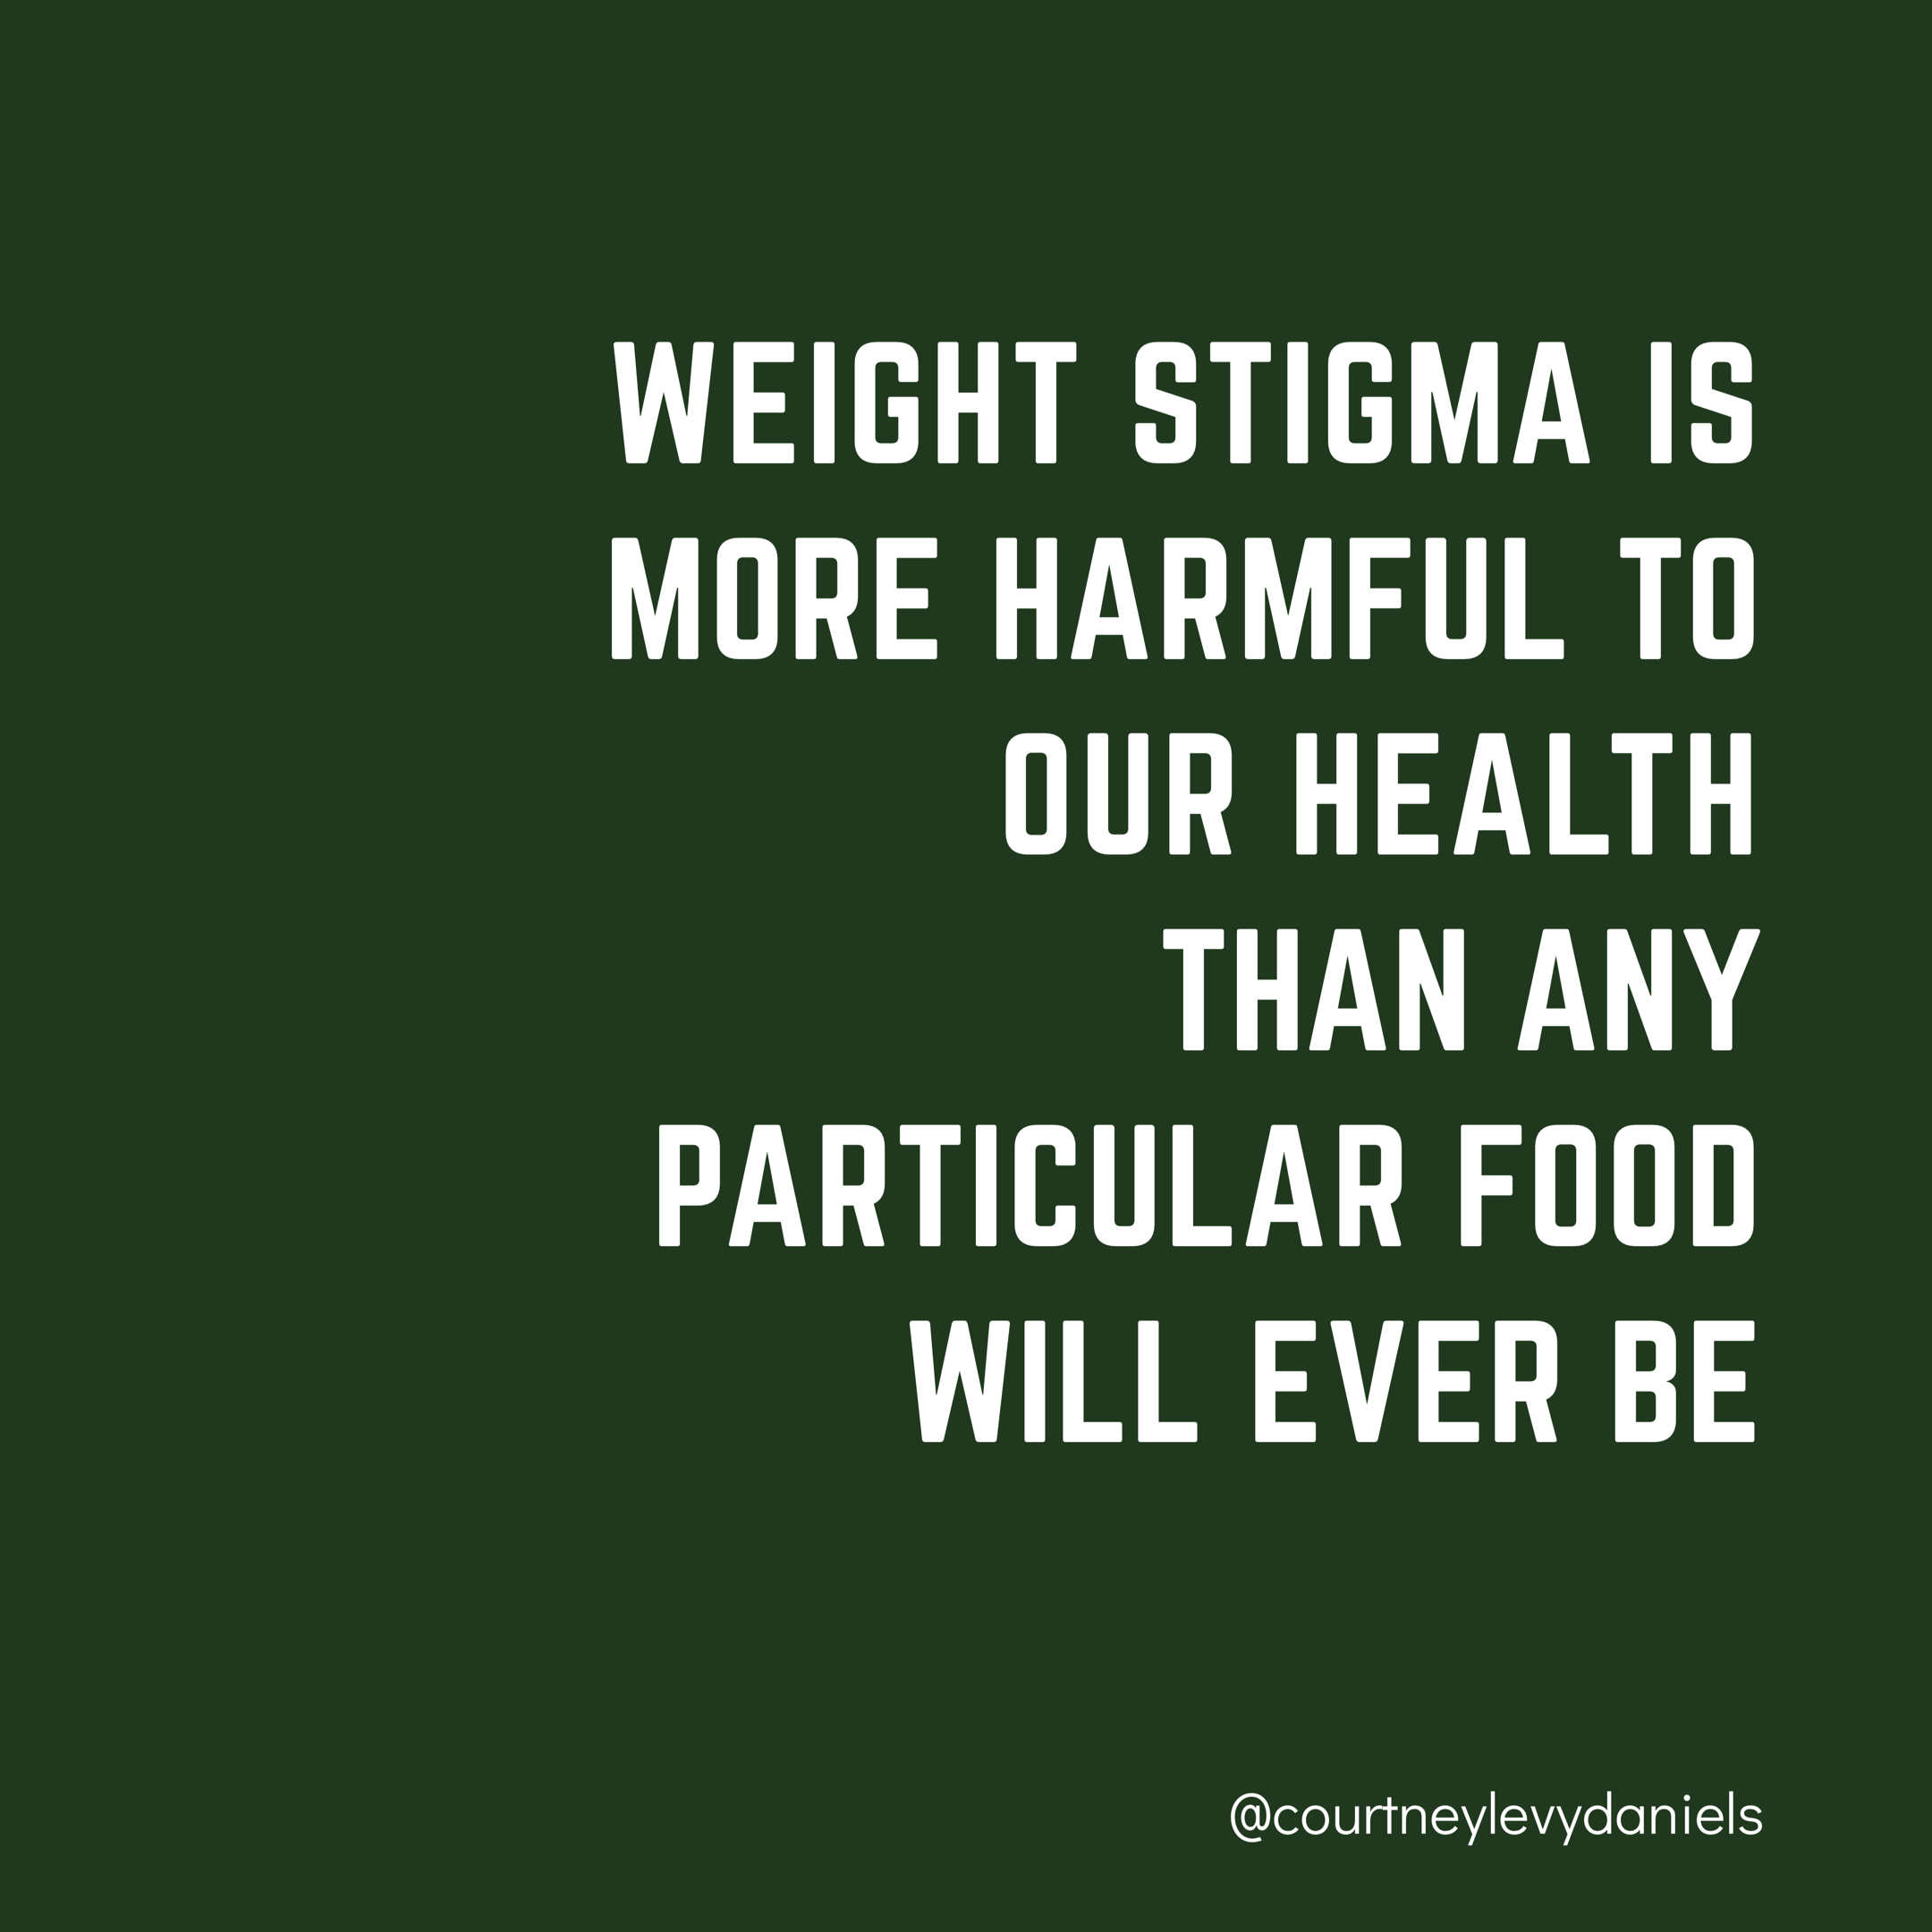 Weight stigma causes more harm than any particular food ever will.PNG